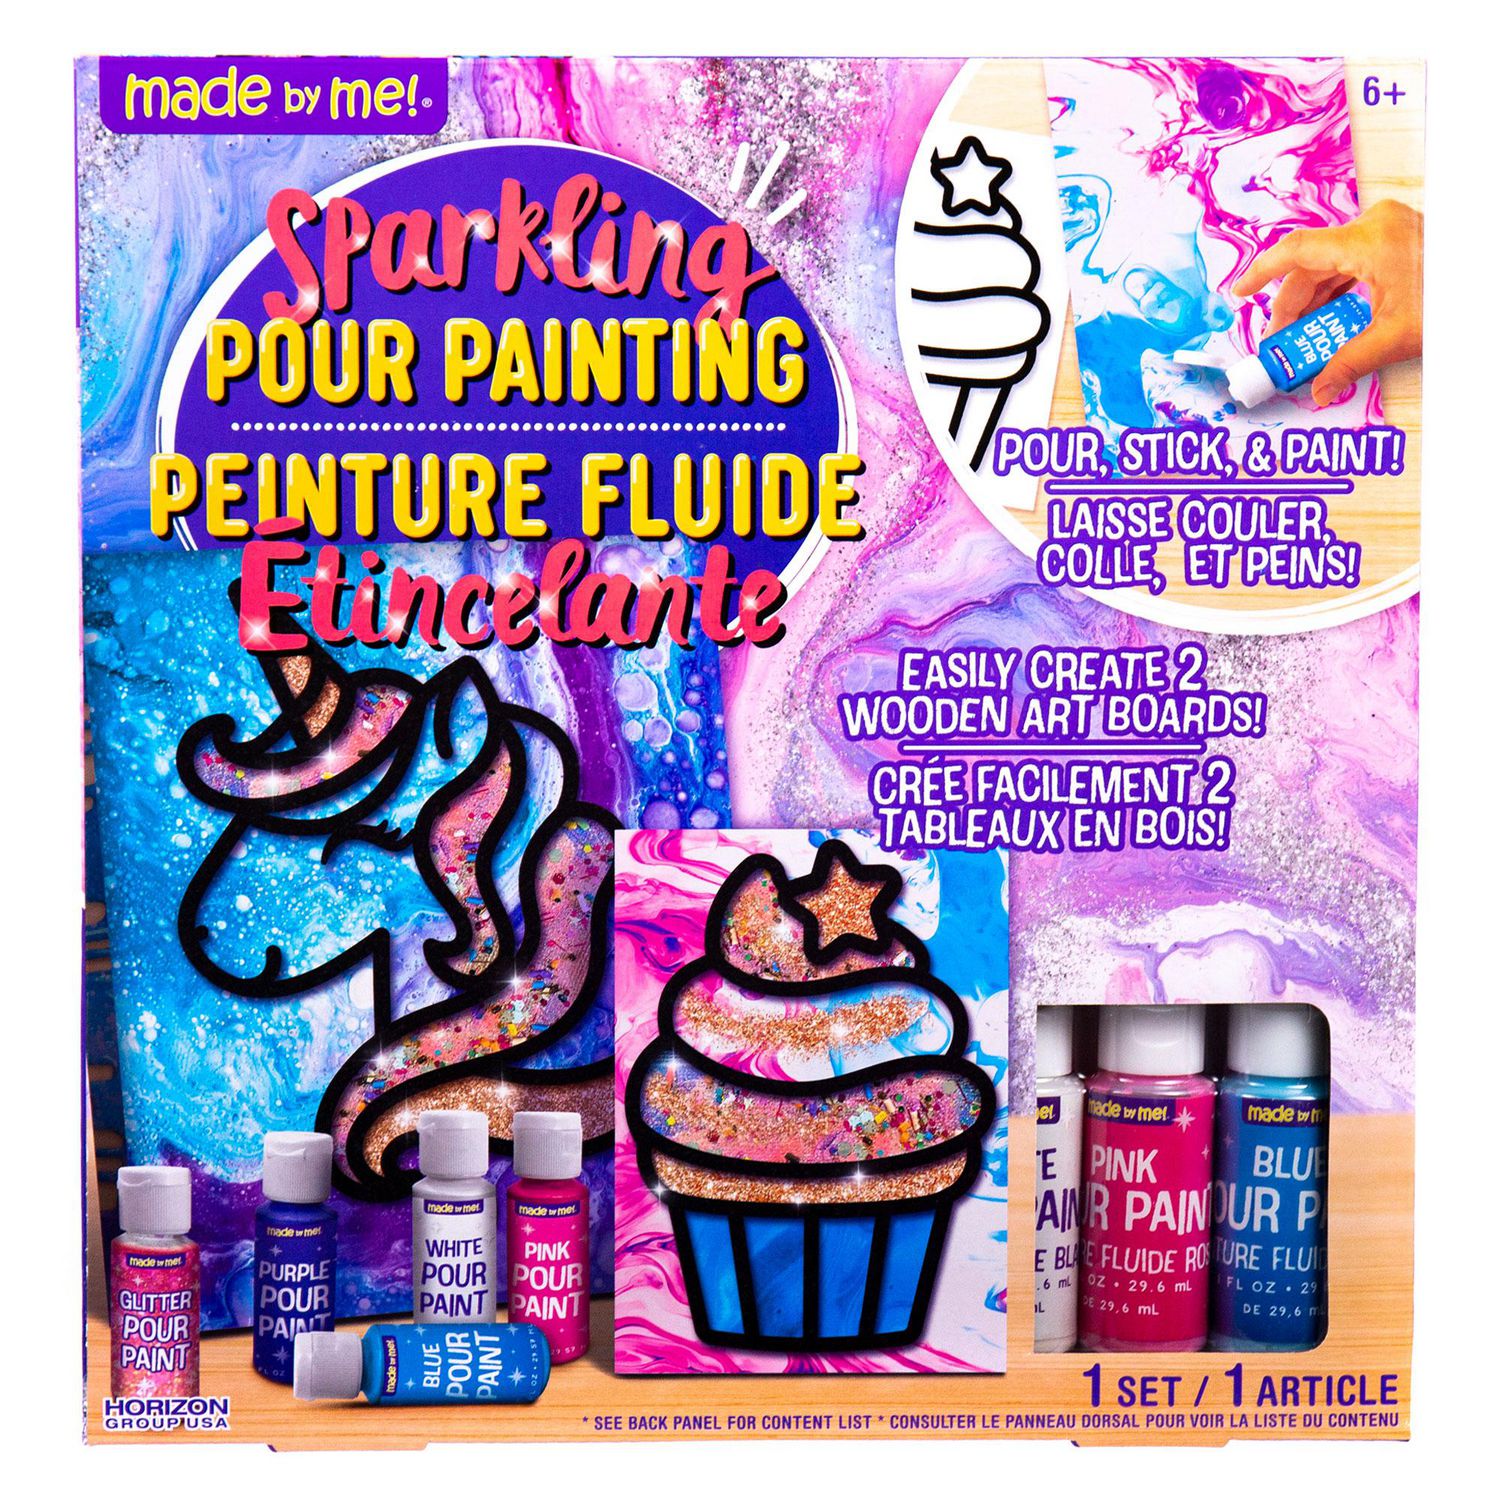 Made By Me! Sparkling Pour Painting, Pour painting kit 